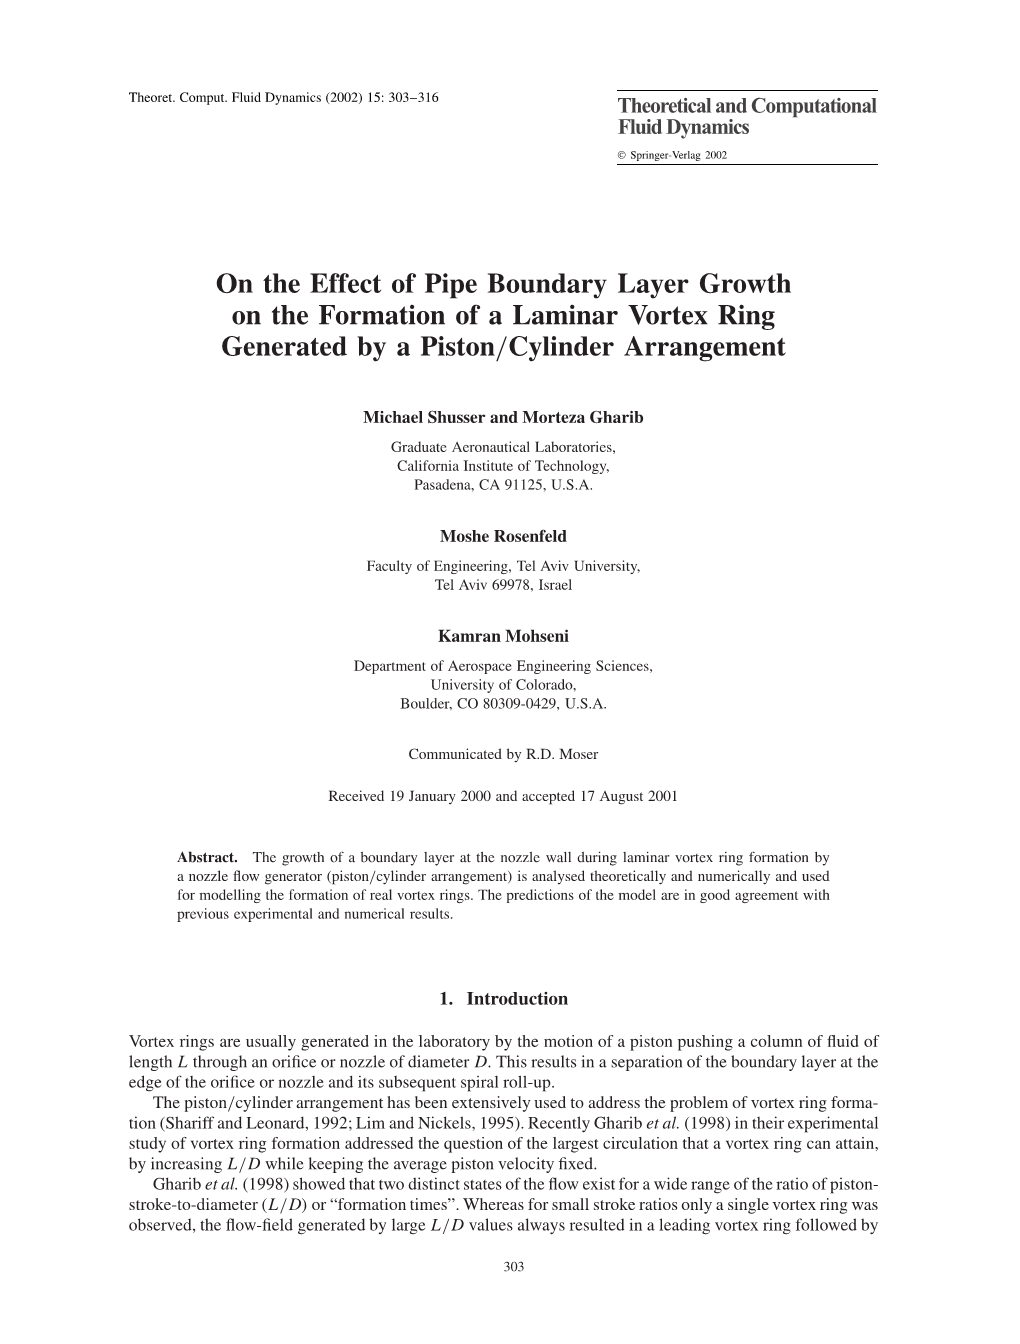 On the Effect of Pipe Boundary Layer Growth on the Formation of a Laminar Vortex Ring Generated by a Piston/Cylinder Arrangement